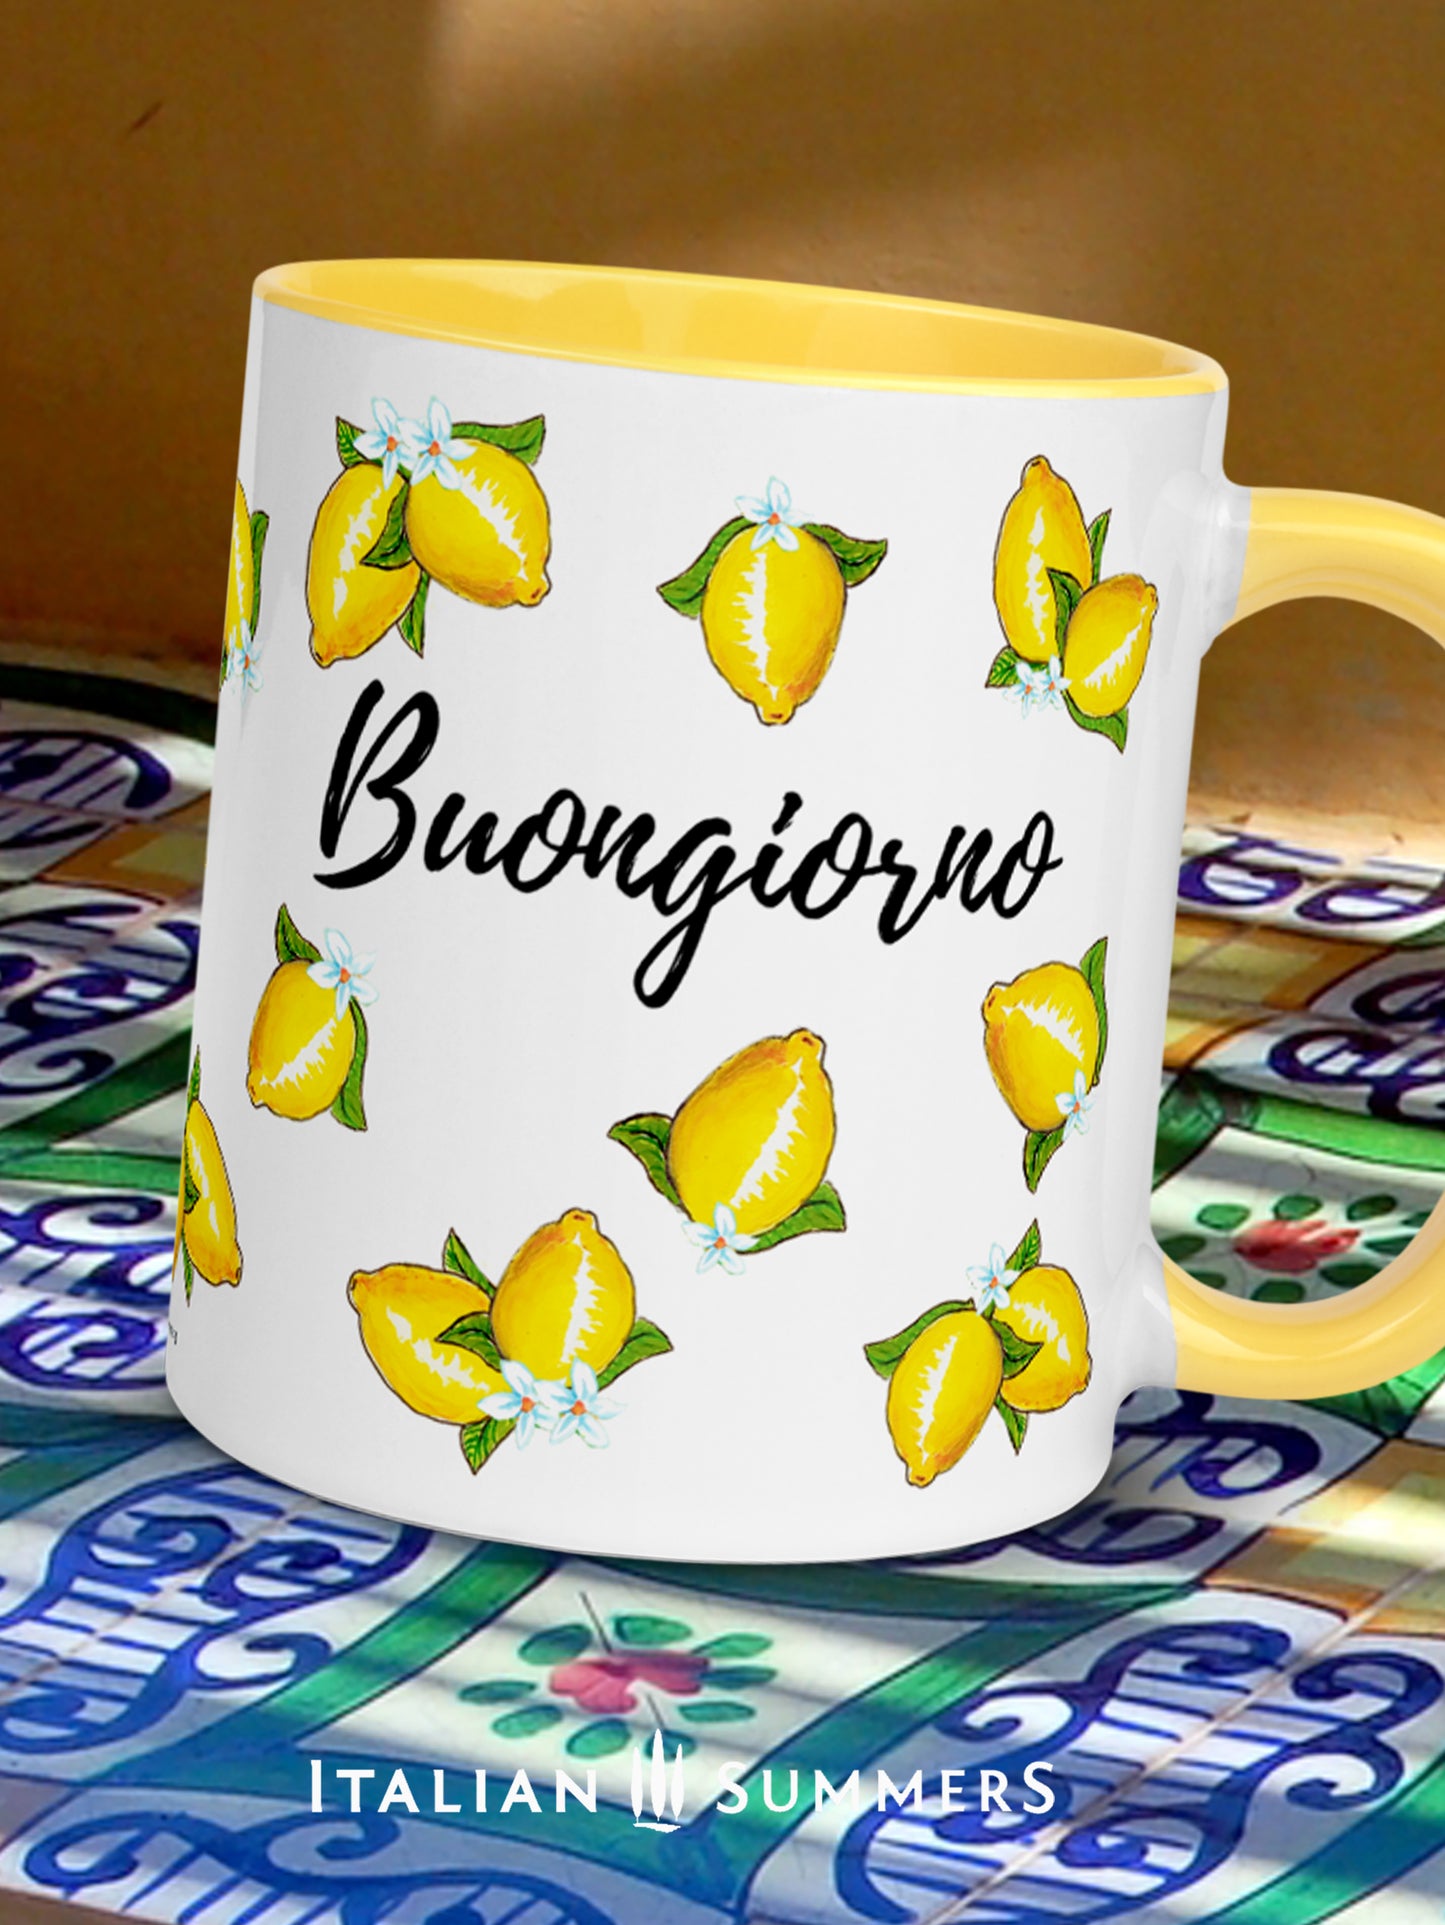 Italy inspired coffee mug with happy sketched lemons over the whole mug on all sidesand a playful Buongiorno writing beteen the lemons. The inside and handle of the mug are yellow. On the lemons are little lemon flowers. Made by Italian Summers